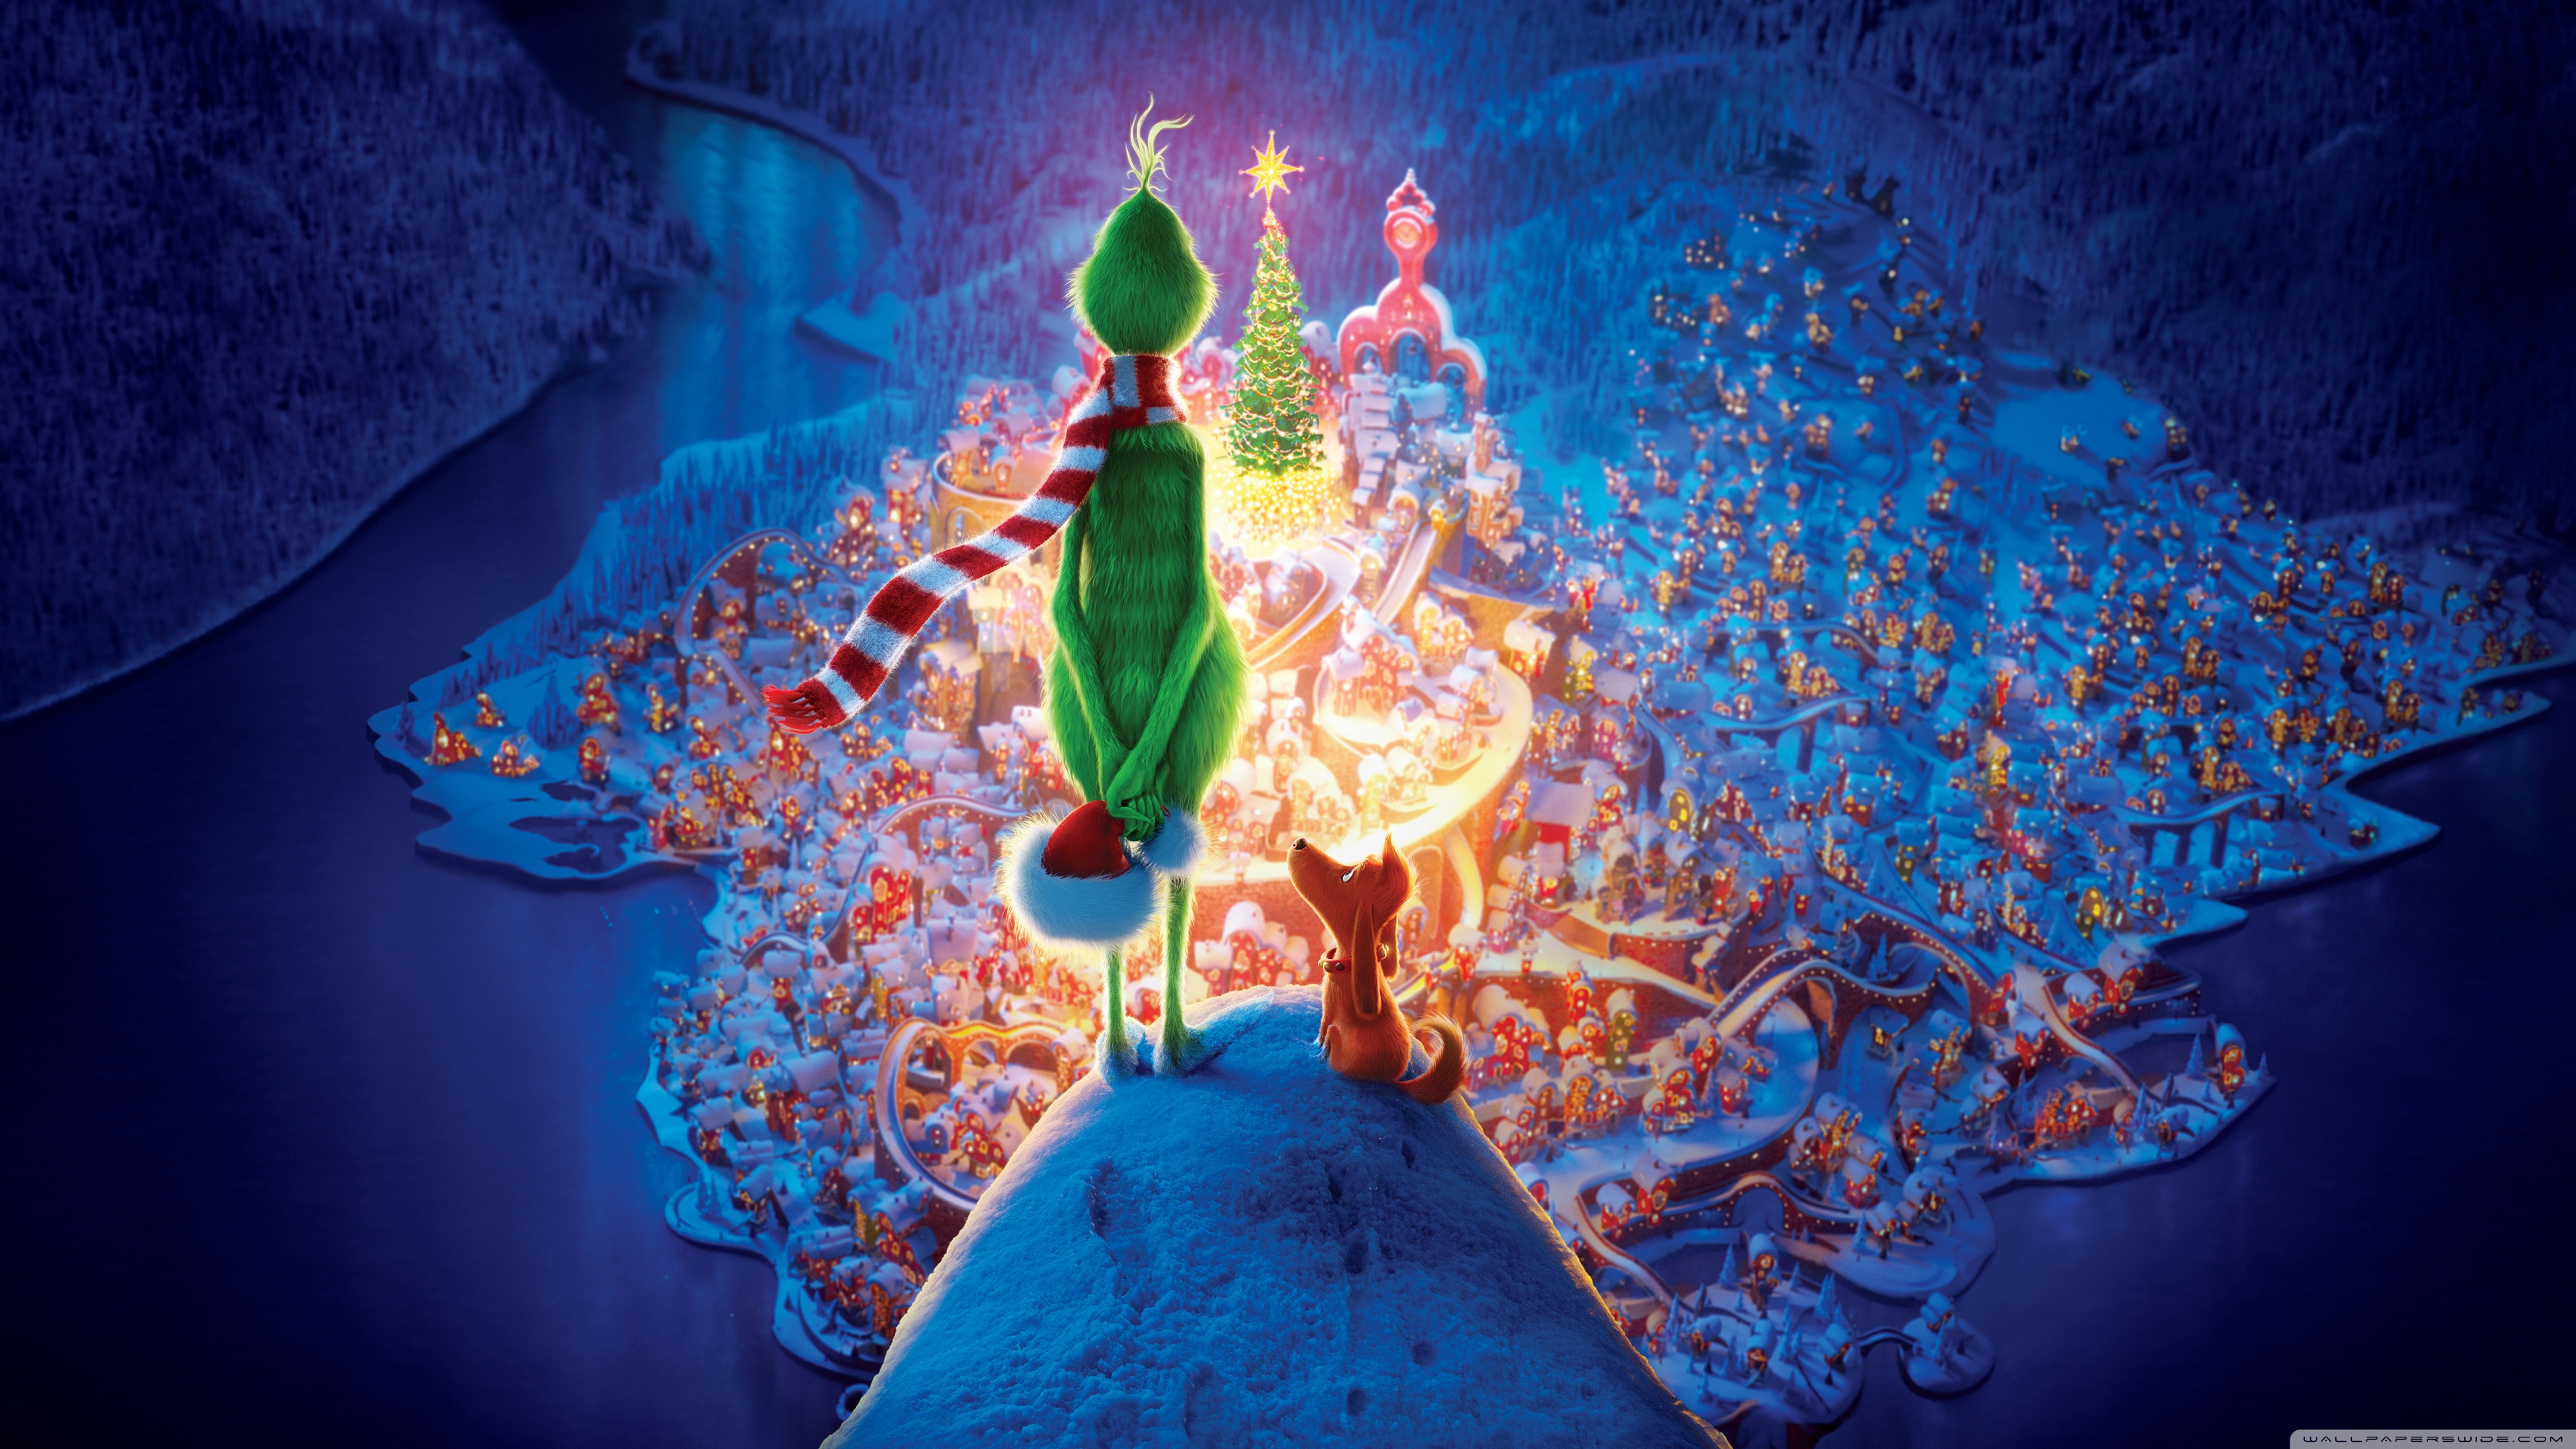 Christmas Collage Wallpaper Laptop Grinch - HD Images Collection